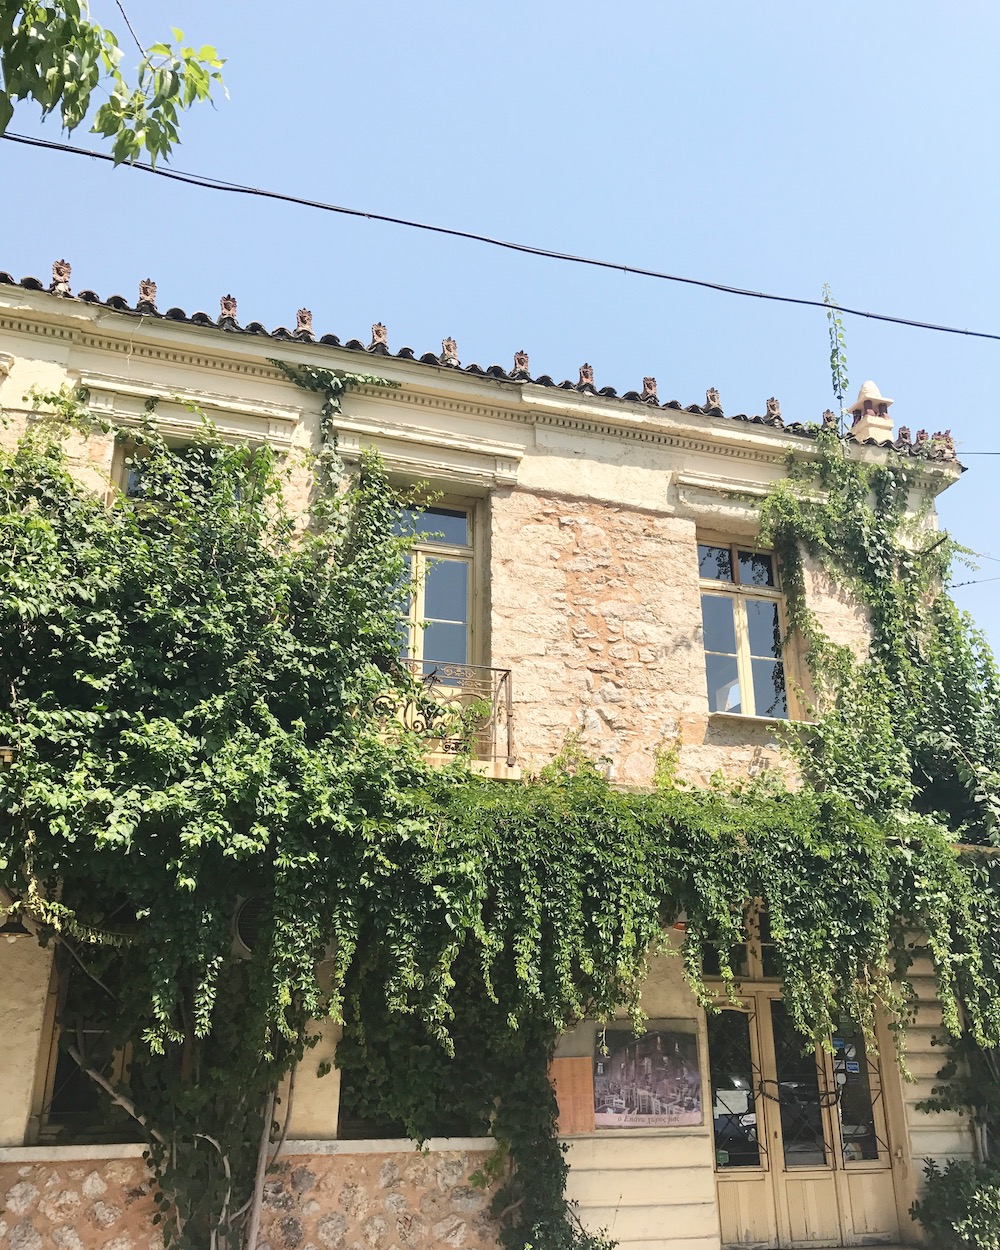 wisteria-in-athens.JPG